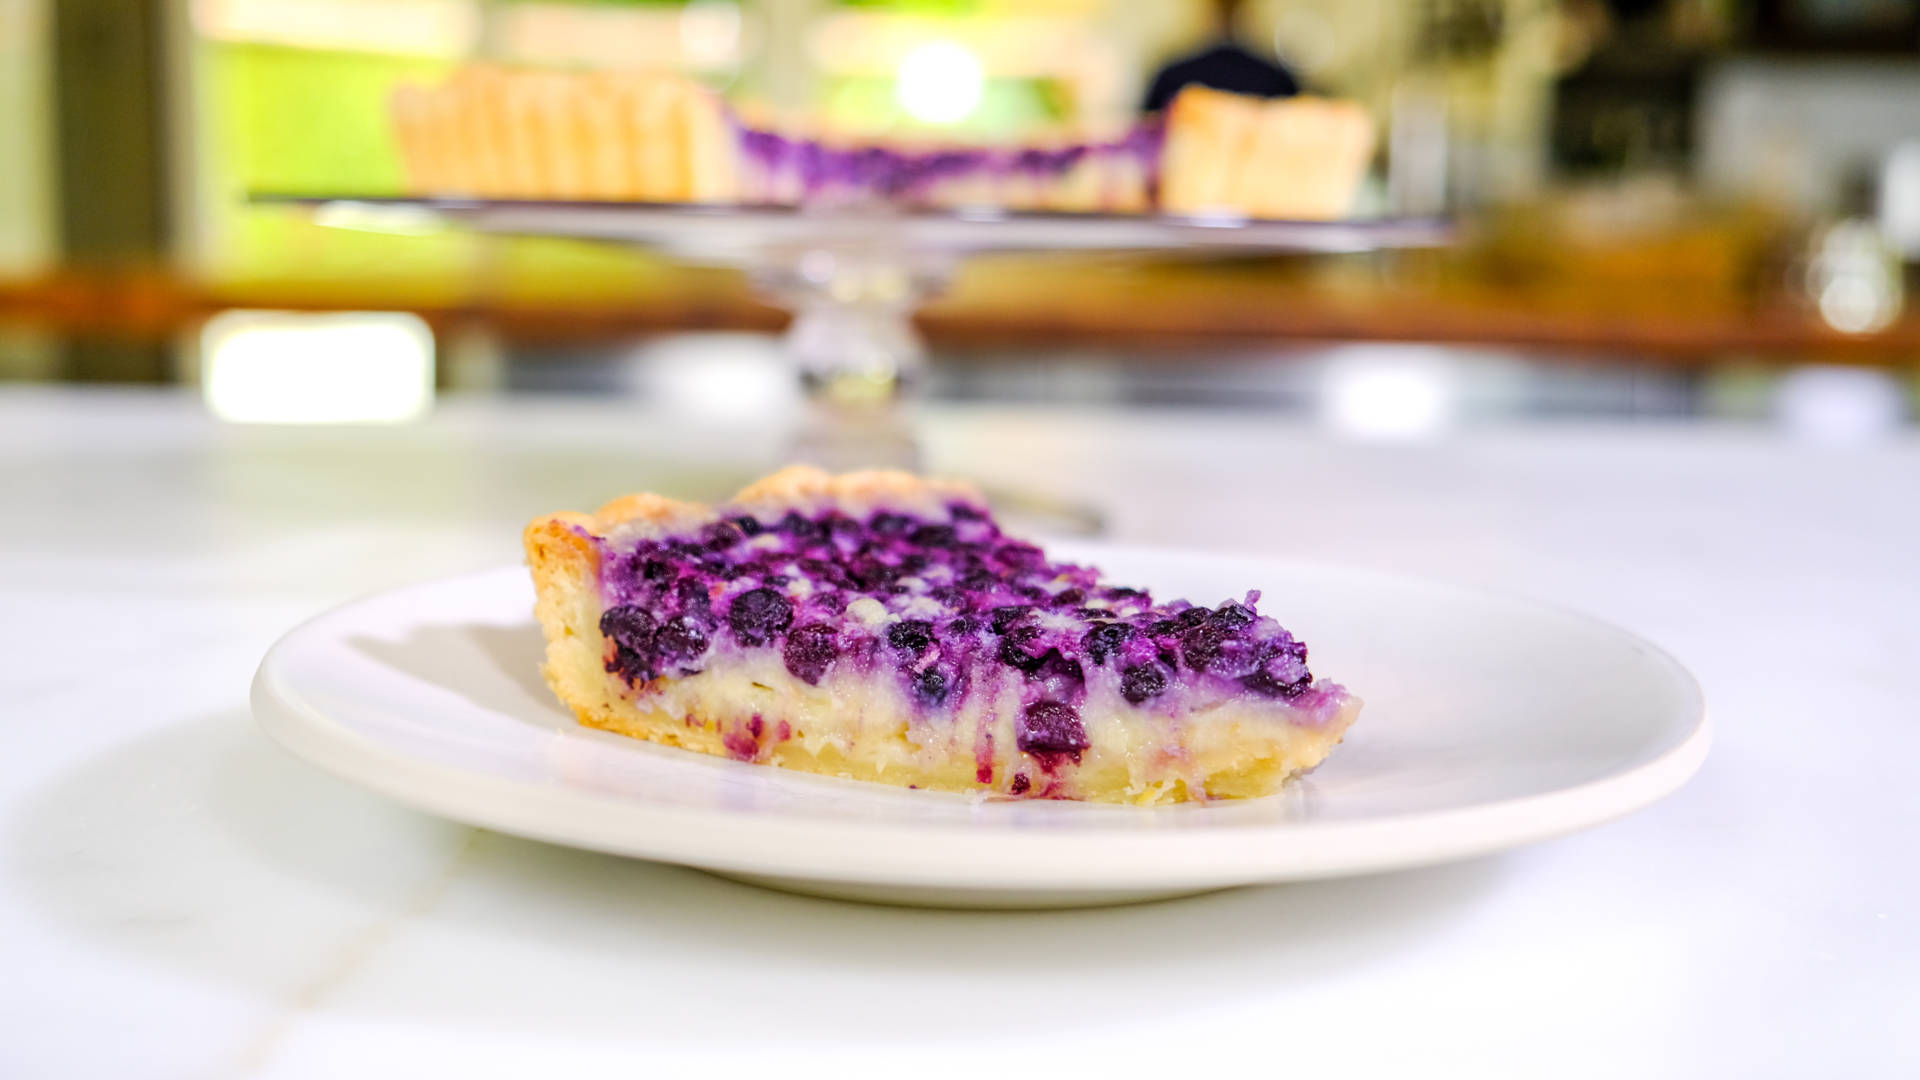 Wild blueberries and lemon make this tart a real treat.